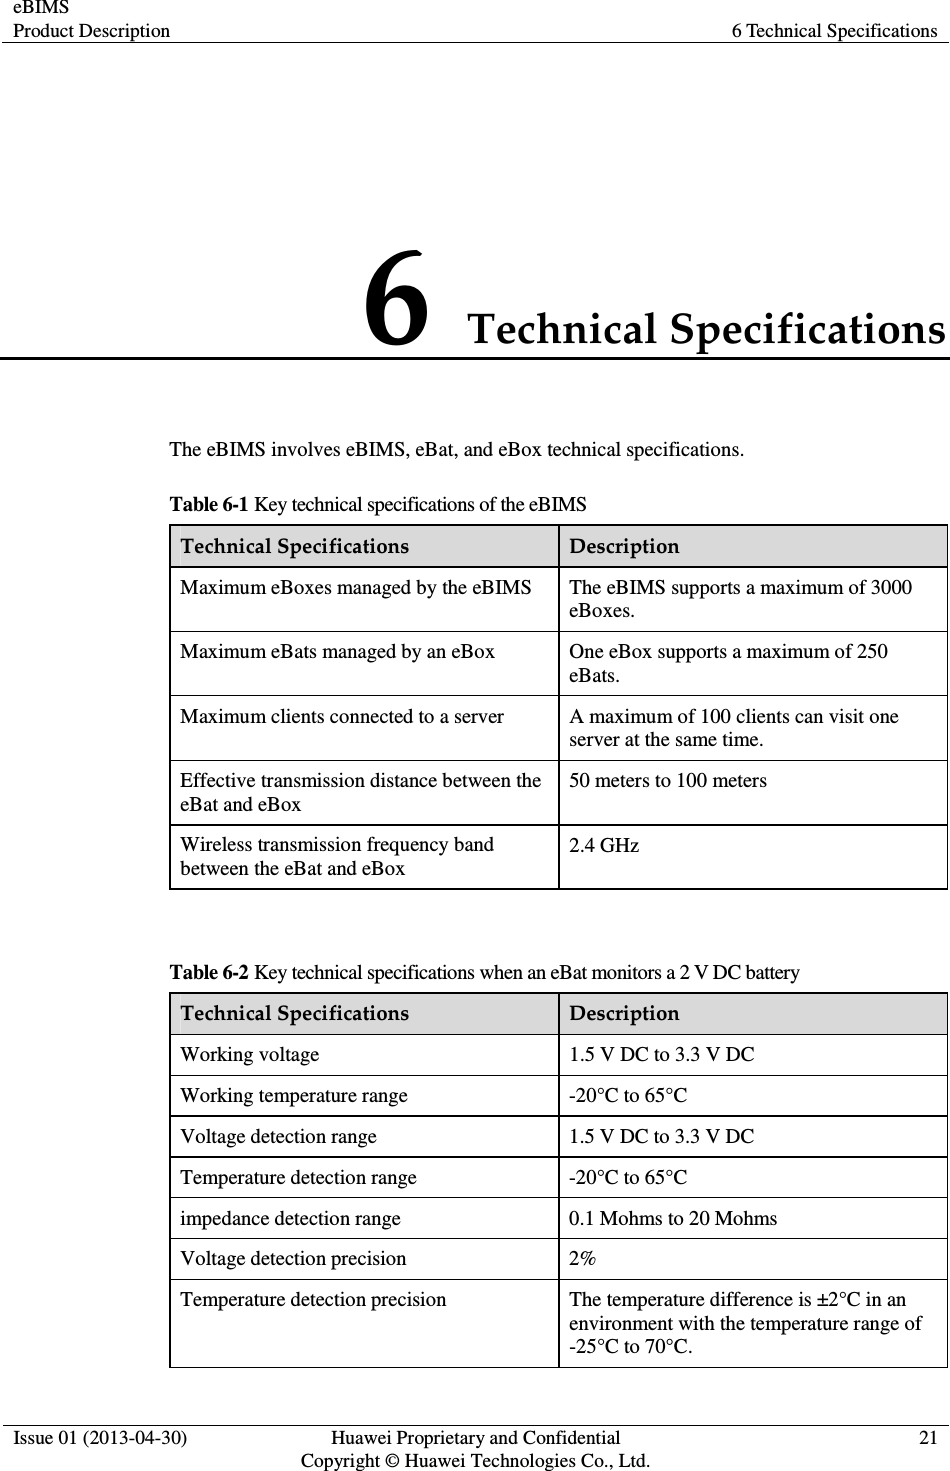 eBIMS Product Description  6 Technical Specifications  Issue 01 (2013-04-30)  Huawei Proprietary and Confidential                                     Copyright © Huawei Technologies Co., Ltd. 21  6 Technical Specifications The eBIMS involves eBIMS, eBat, and eBox technical specifications. Table 6-1 Key technical specifications of the eBIMS Technical Specifications  Description Maximum eBoxes managed by the eBIMS  The eBIMS supports a maximum of 3000 eBoxes. Maximum eBats managed by an eBox  One eBox supports a maximum of 250 eBats. Maximum clients connected to a server  A maximum of 100 clients can visit one server at the same time. Effective transmission distance between the eBat and eBox 50 meters to 100 meters Wireless transmission frequency band between the eBat and eBox 2.4 GHz  Table 6-2 Key technical specifications when an eBat monitors a 2 V DC battery Technical Specifications  Description Working voltage  1.5 V DC to 3.3 V DC Working temperature range  -20°C to 65°C Voltage detection range  1.5 V DC to 3.3 V DC Temperature detection range  -20°C to 65°C impedance detection range  0.1 Mohms to 20 Mohms Voltage detection precision  2% Temperature detection precision  The temperature difference is ±2°C in an environment with the temperature range of -25°C to 70°C. 